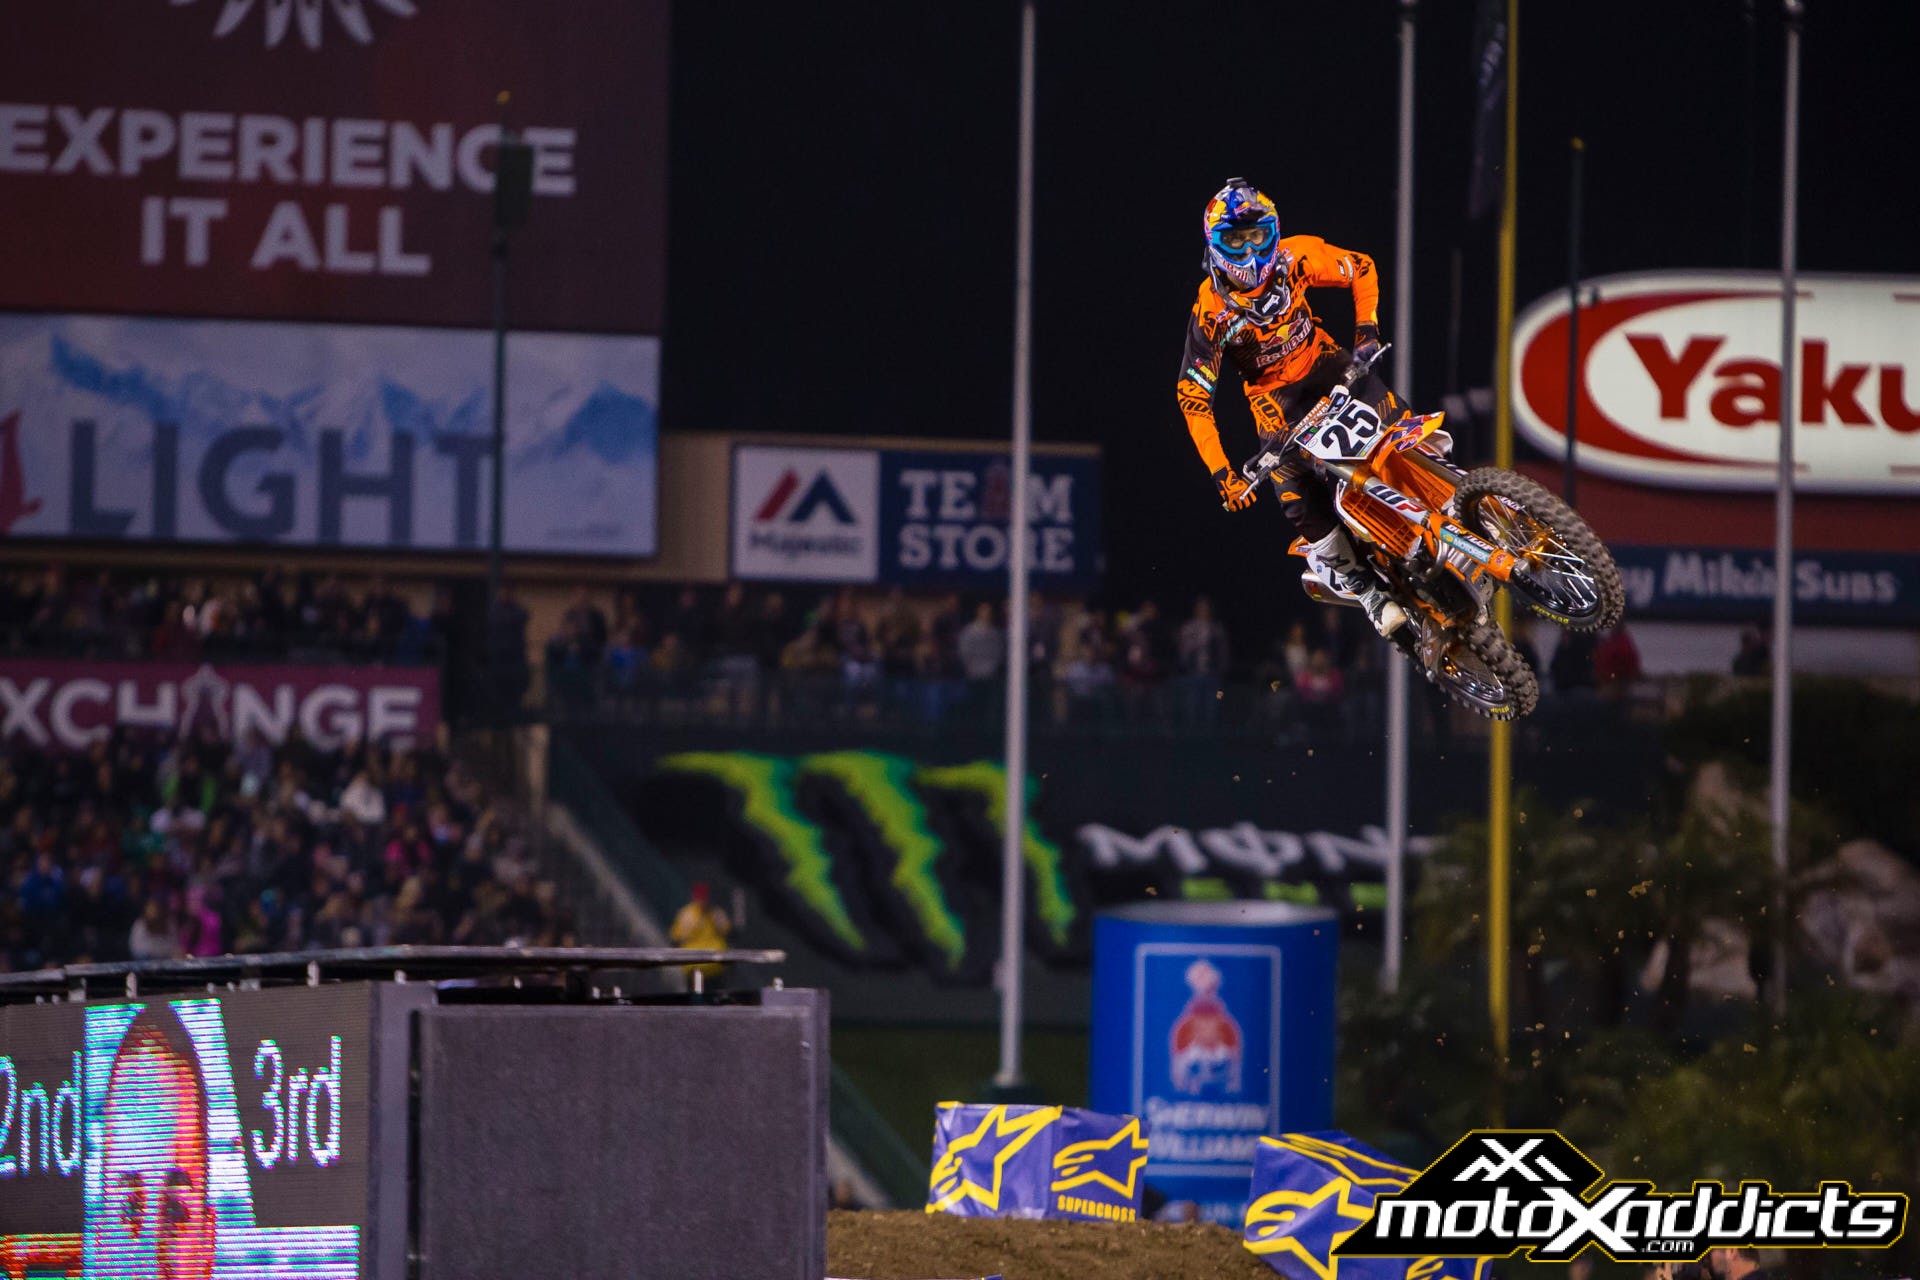 Musquin was dead last after lap one, but fought back to finish 9th. Photo by: Hoppenworld